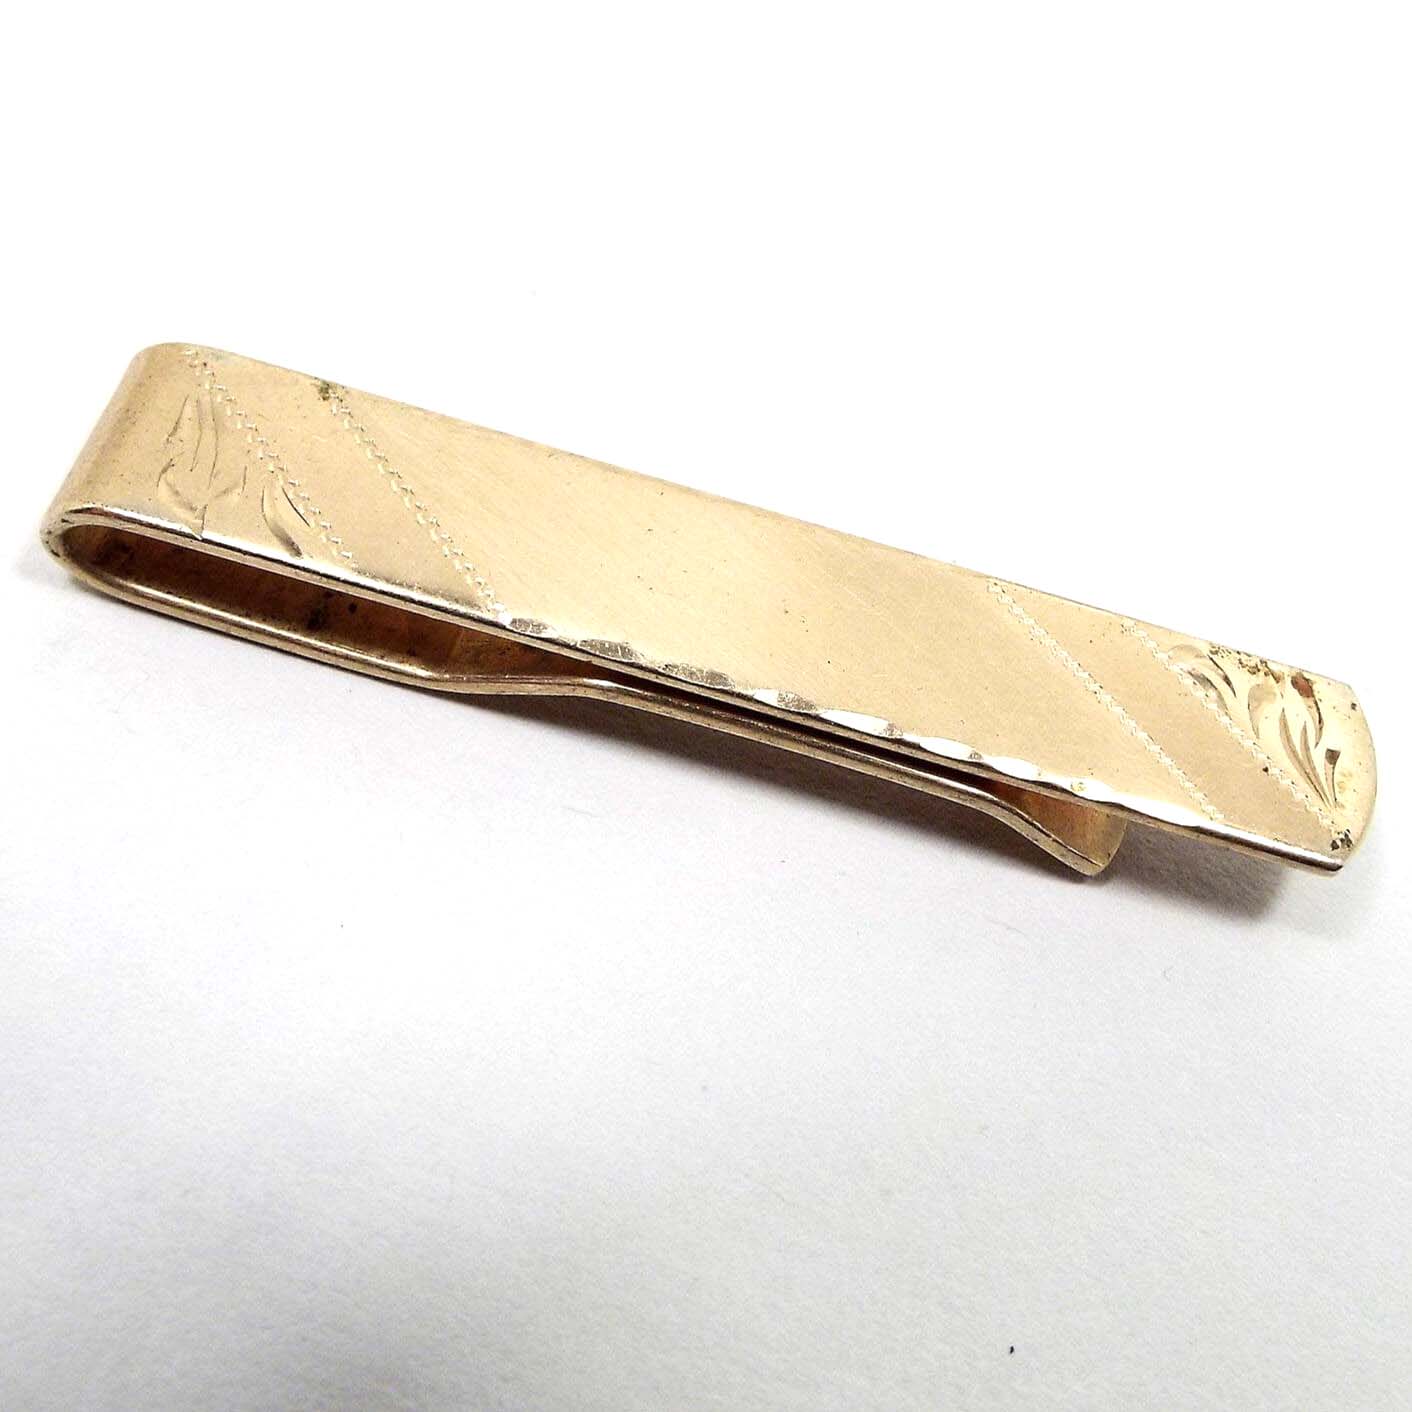 Angled front view of the Mid Century vintage etched tie bar. The metal is gold tone in color. There are diagonal areas of matte and shiny gold tone. At each end is an etched leaf like design. The bottom and top edge have a beveled texture.